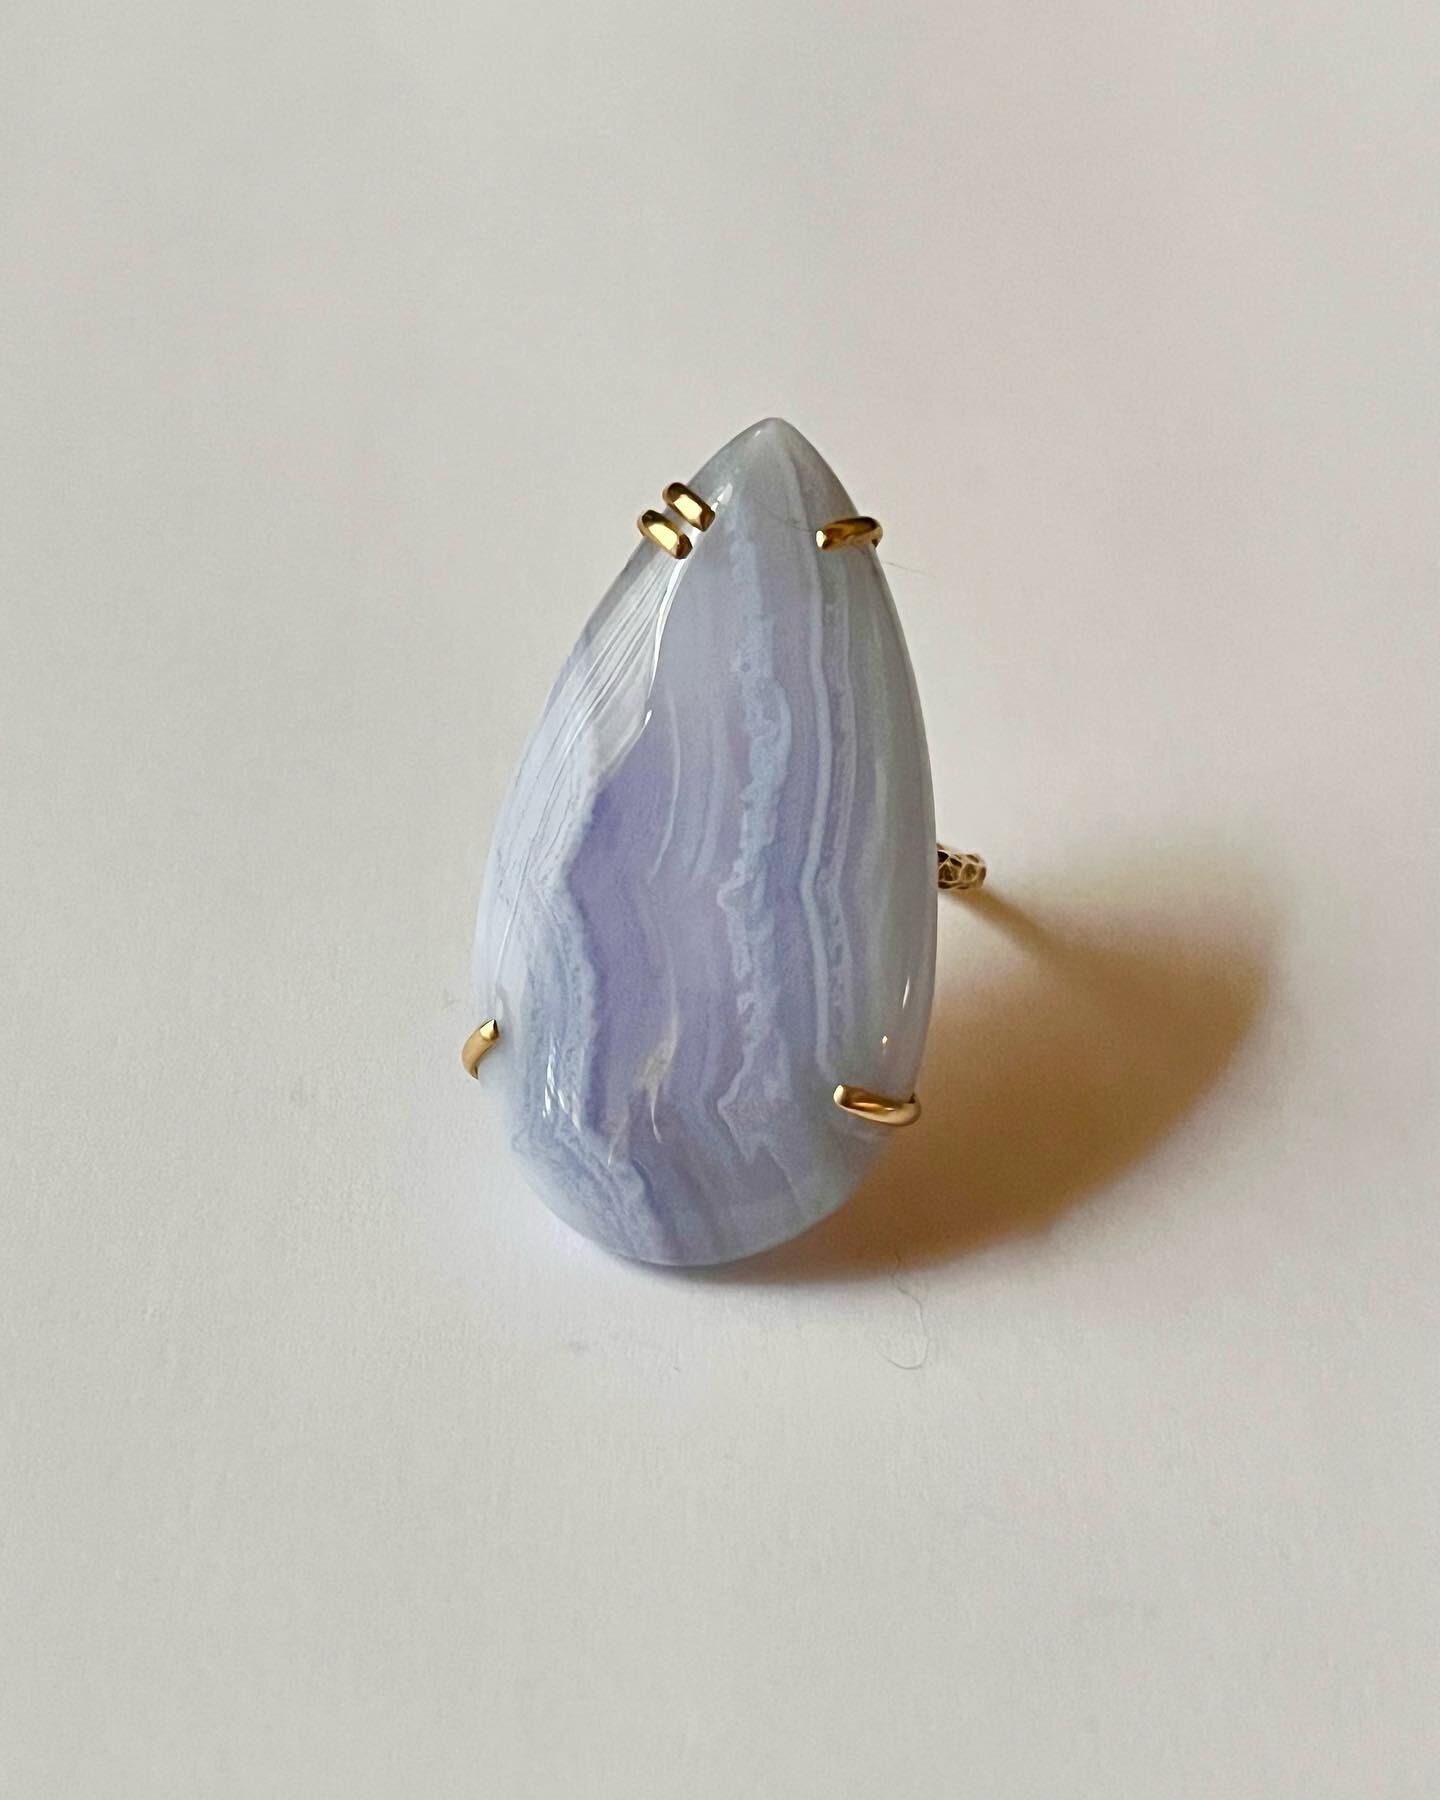 Blue lace agate set in 14k yellow gold. This beauty is a statement for sure. 
&bull;
&bull;
&bull;
&bull;
&bull;
#larueandco #shoplarueandco #larueandcofine #14kyellow #agate